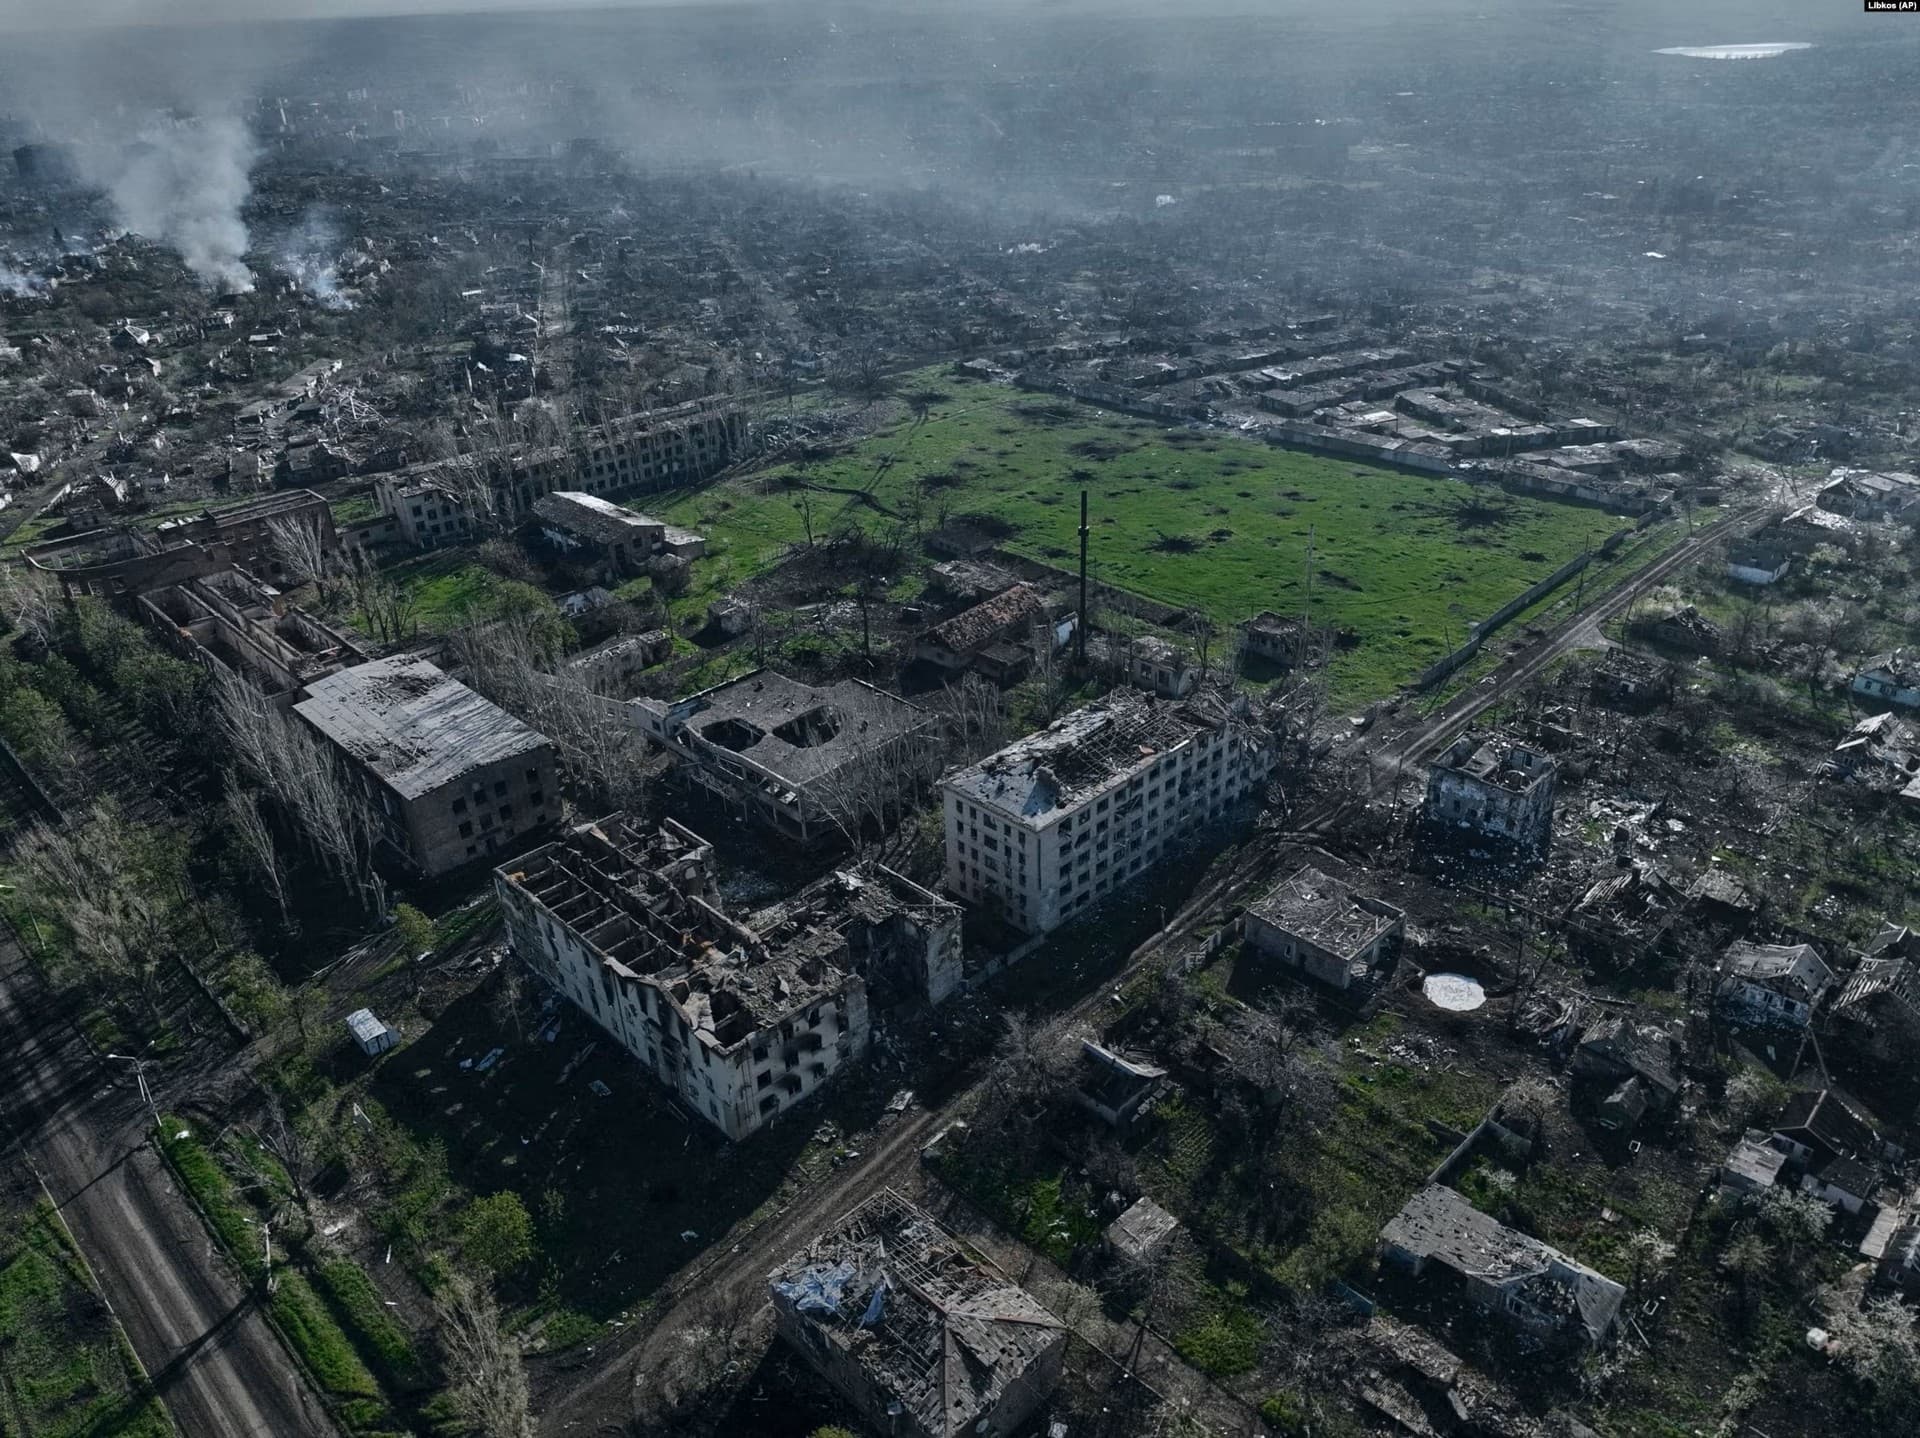 Smoke rises from buildings in this aerial view of Bakhmut